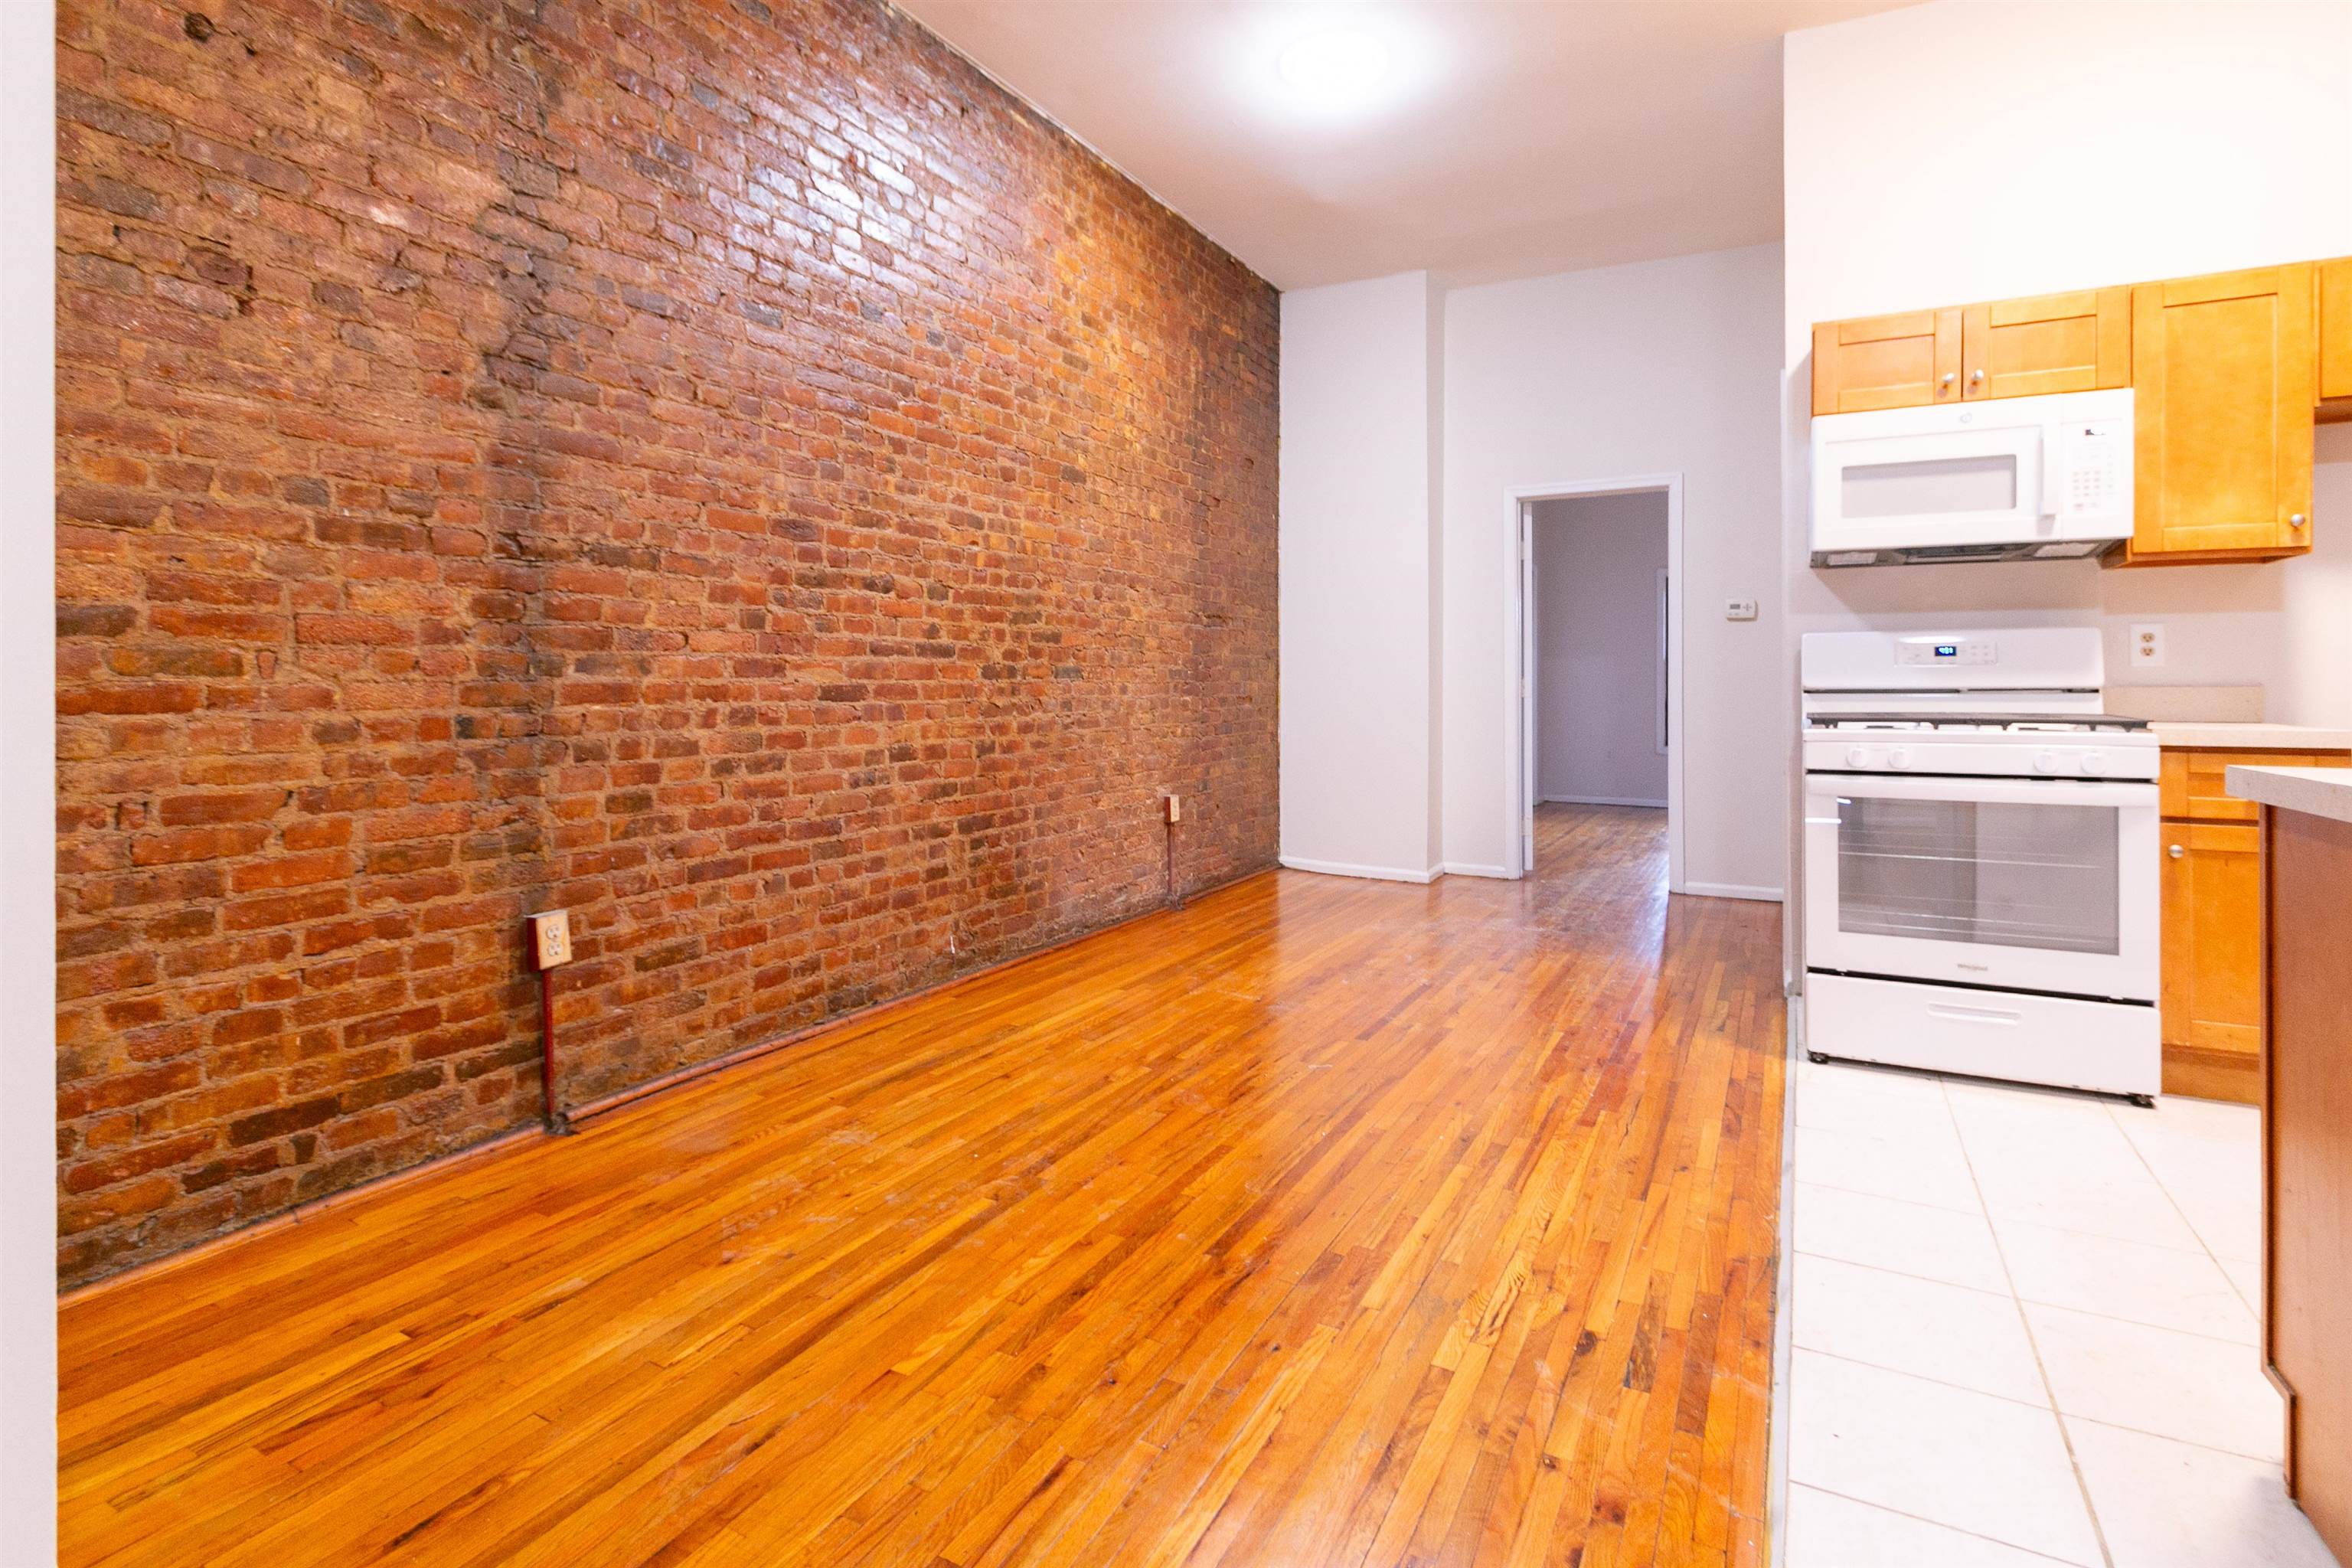 # 240008986 - For Rent in JERSEY CITY - Greenville NJ